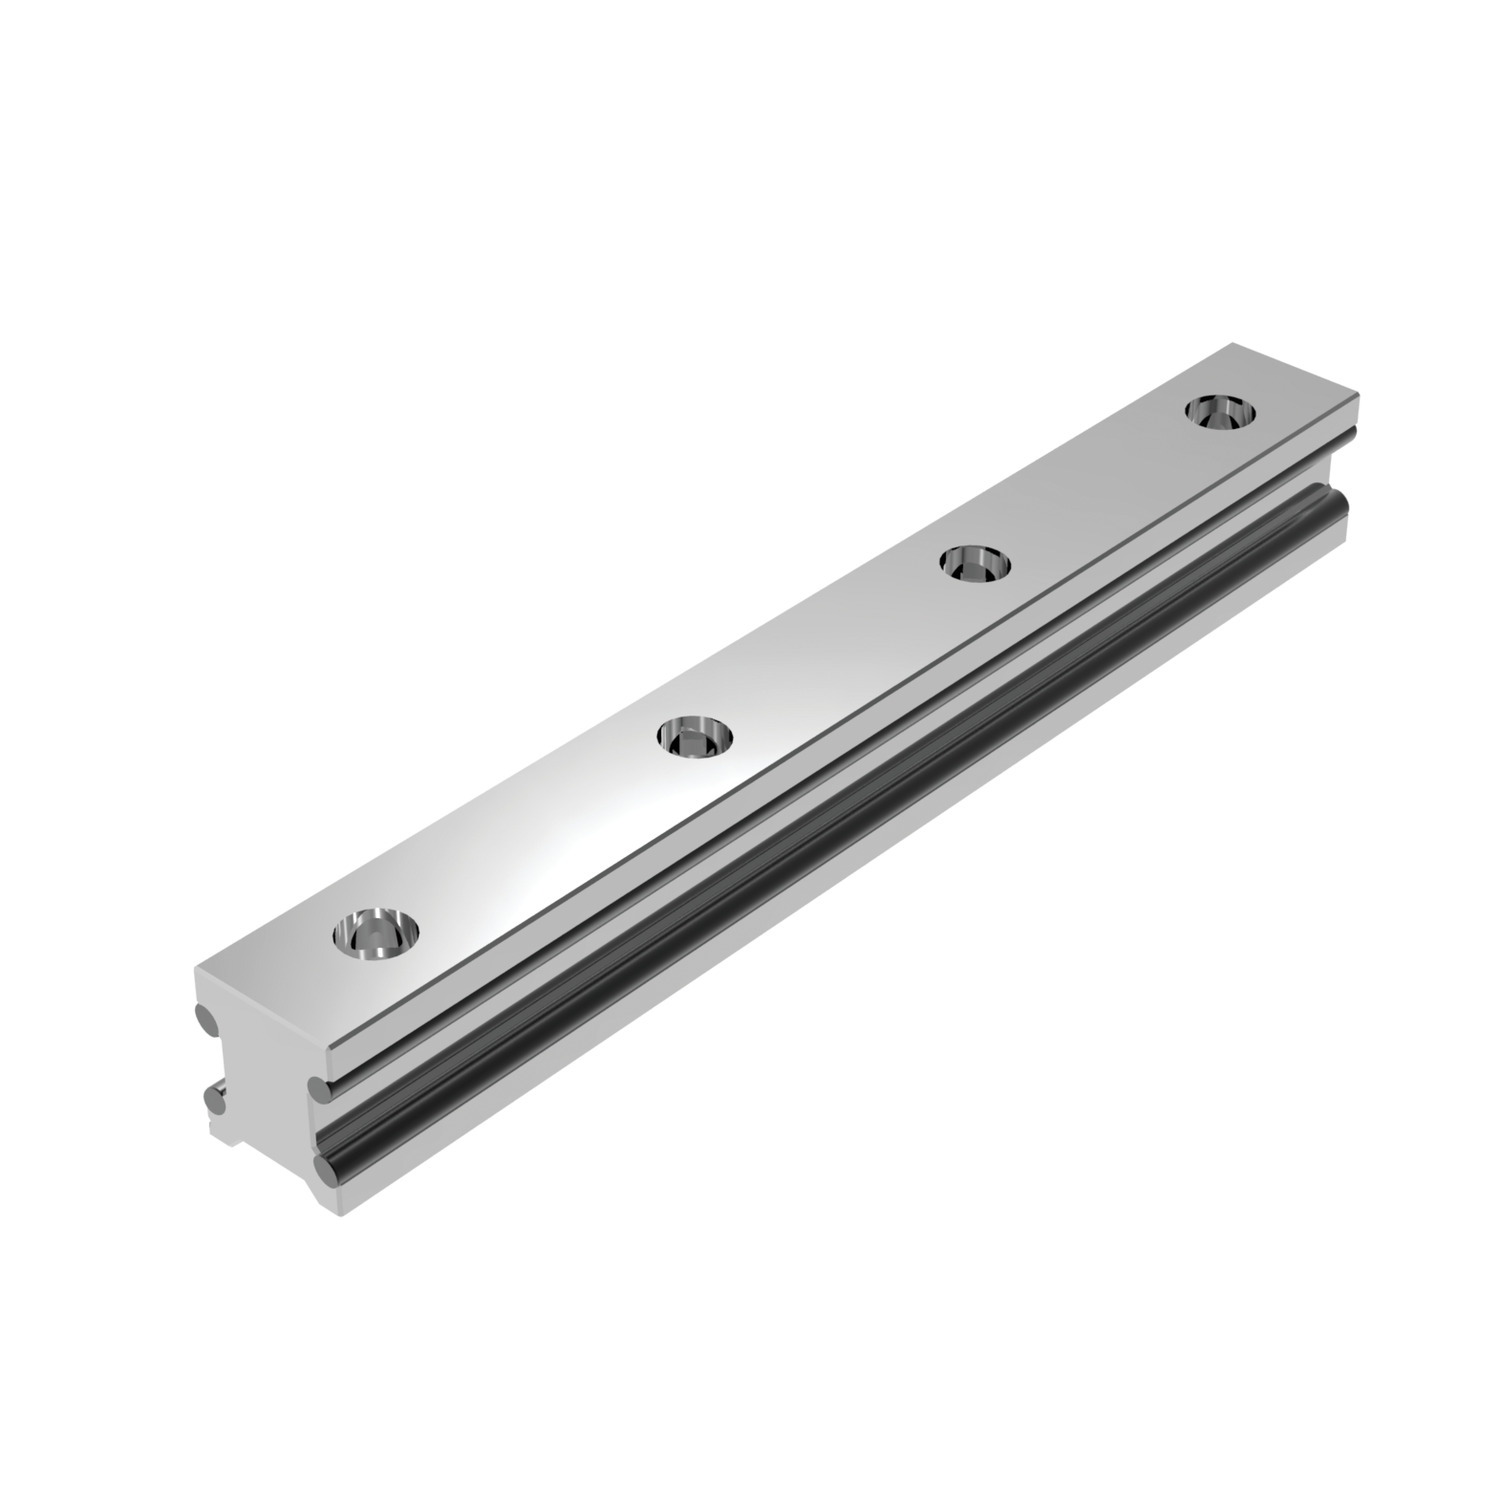 Product L1018.25, 25mm Aluminium Linear Guide Rail with stainless raceways / 